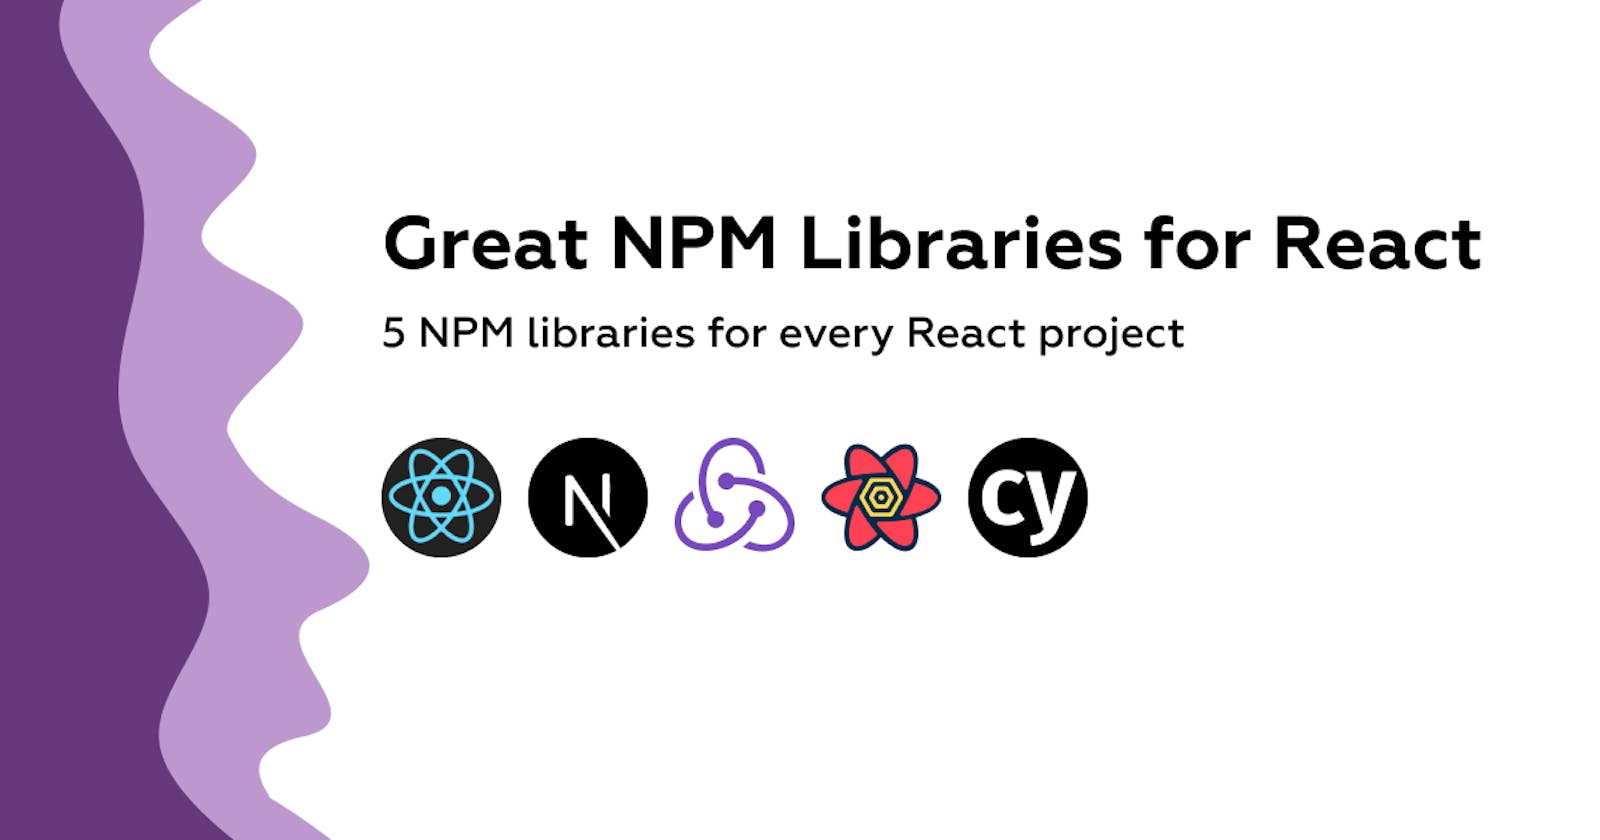 Great NPM Libraries for React